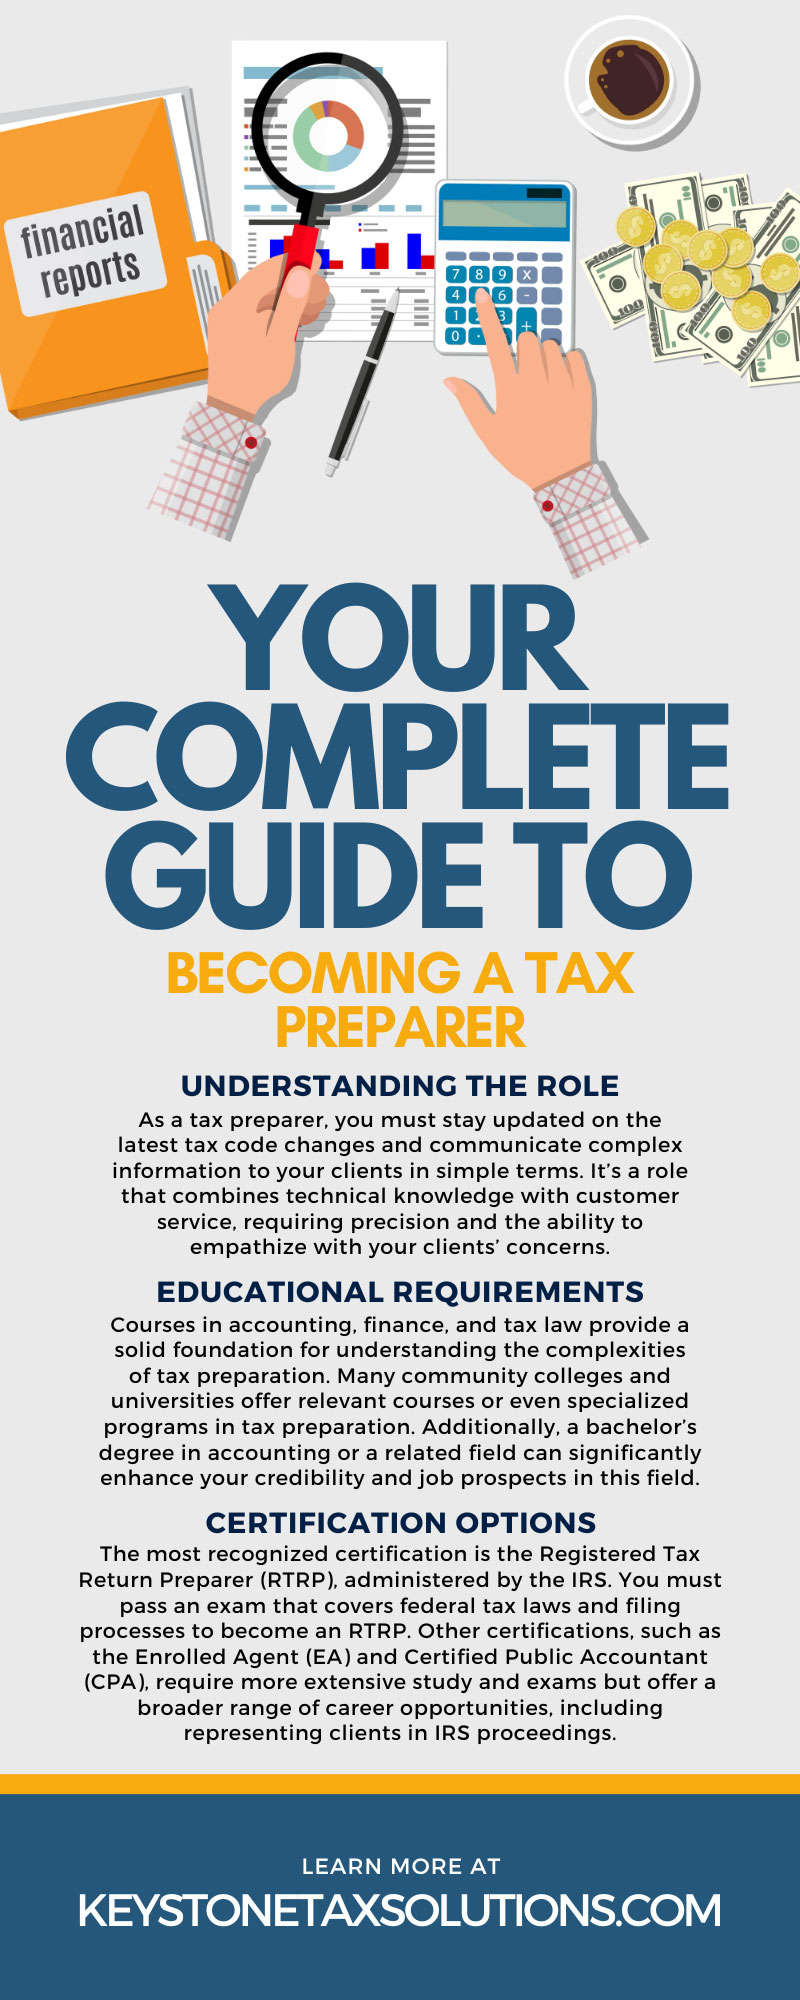 Your Complete Guide to Becoming a Tax Preparer